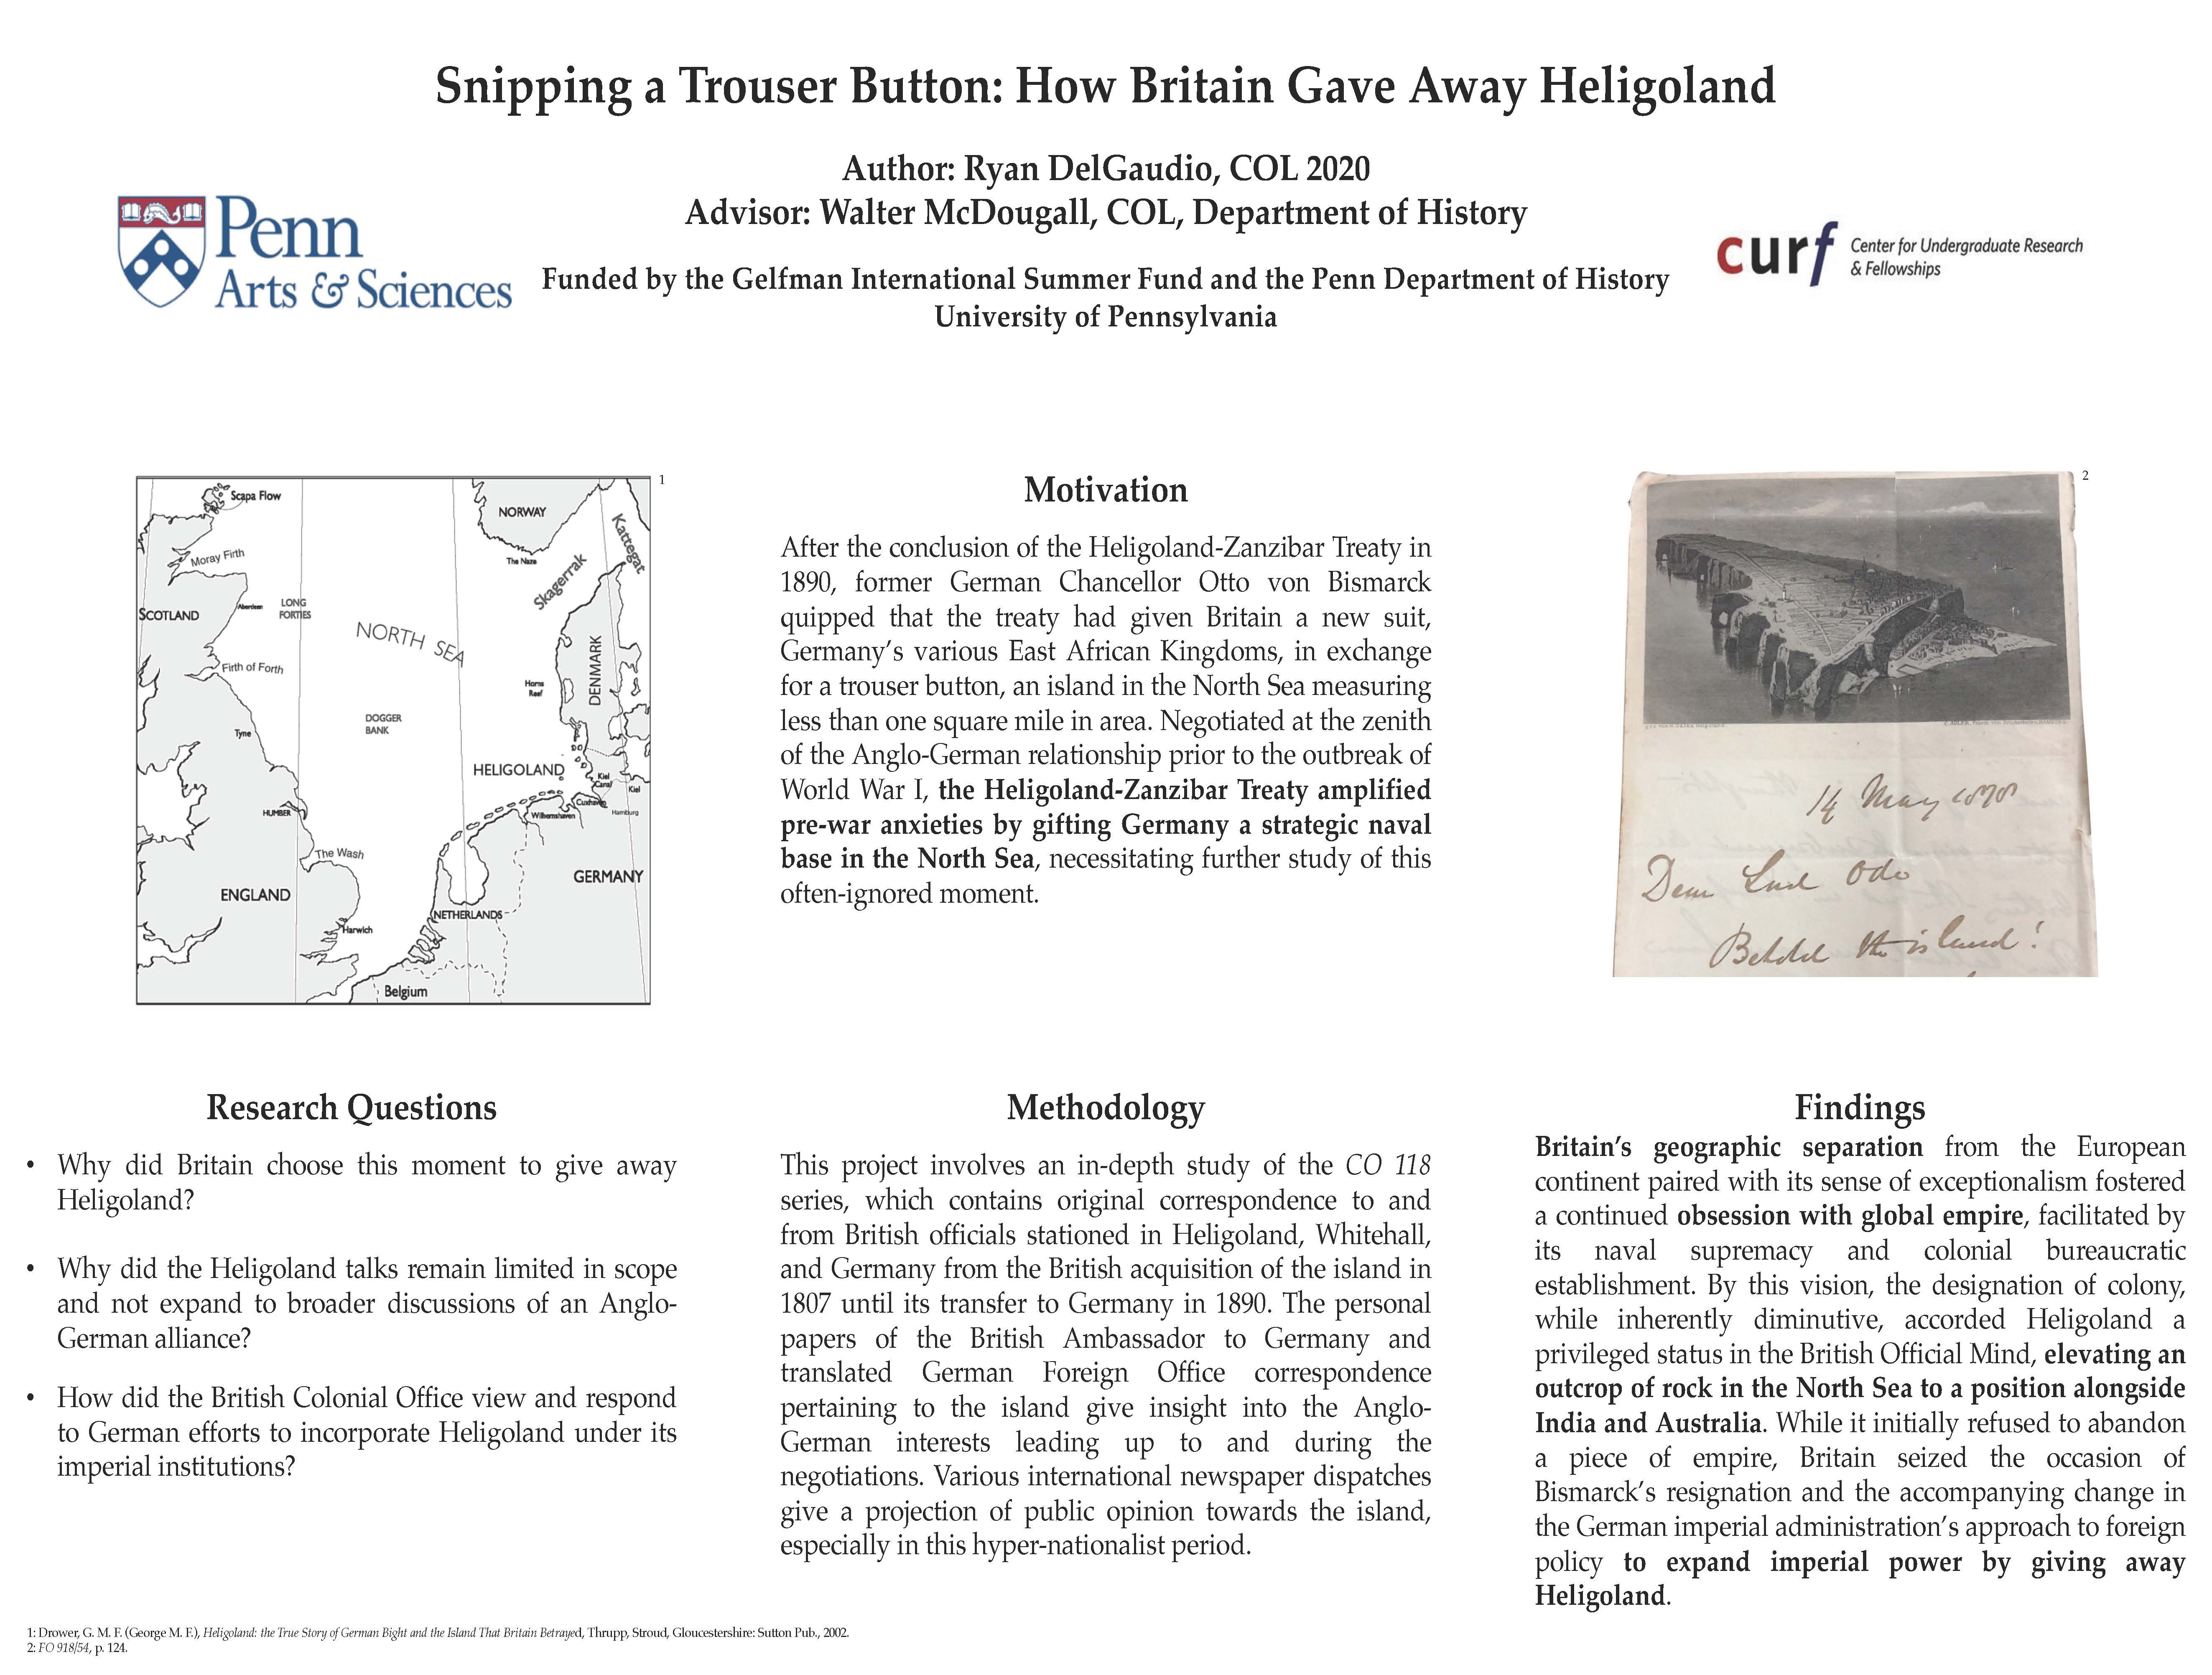 Snipping A Trouser Button: How Britain Gave Away Heligoland